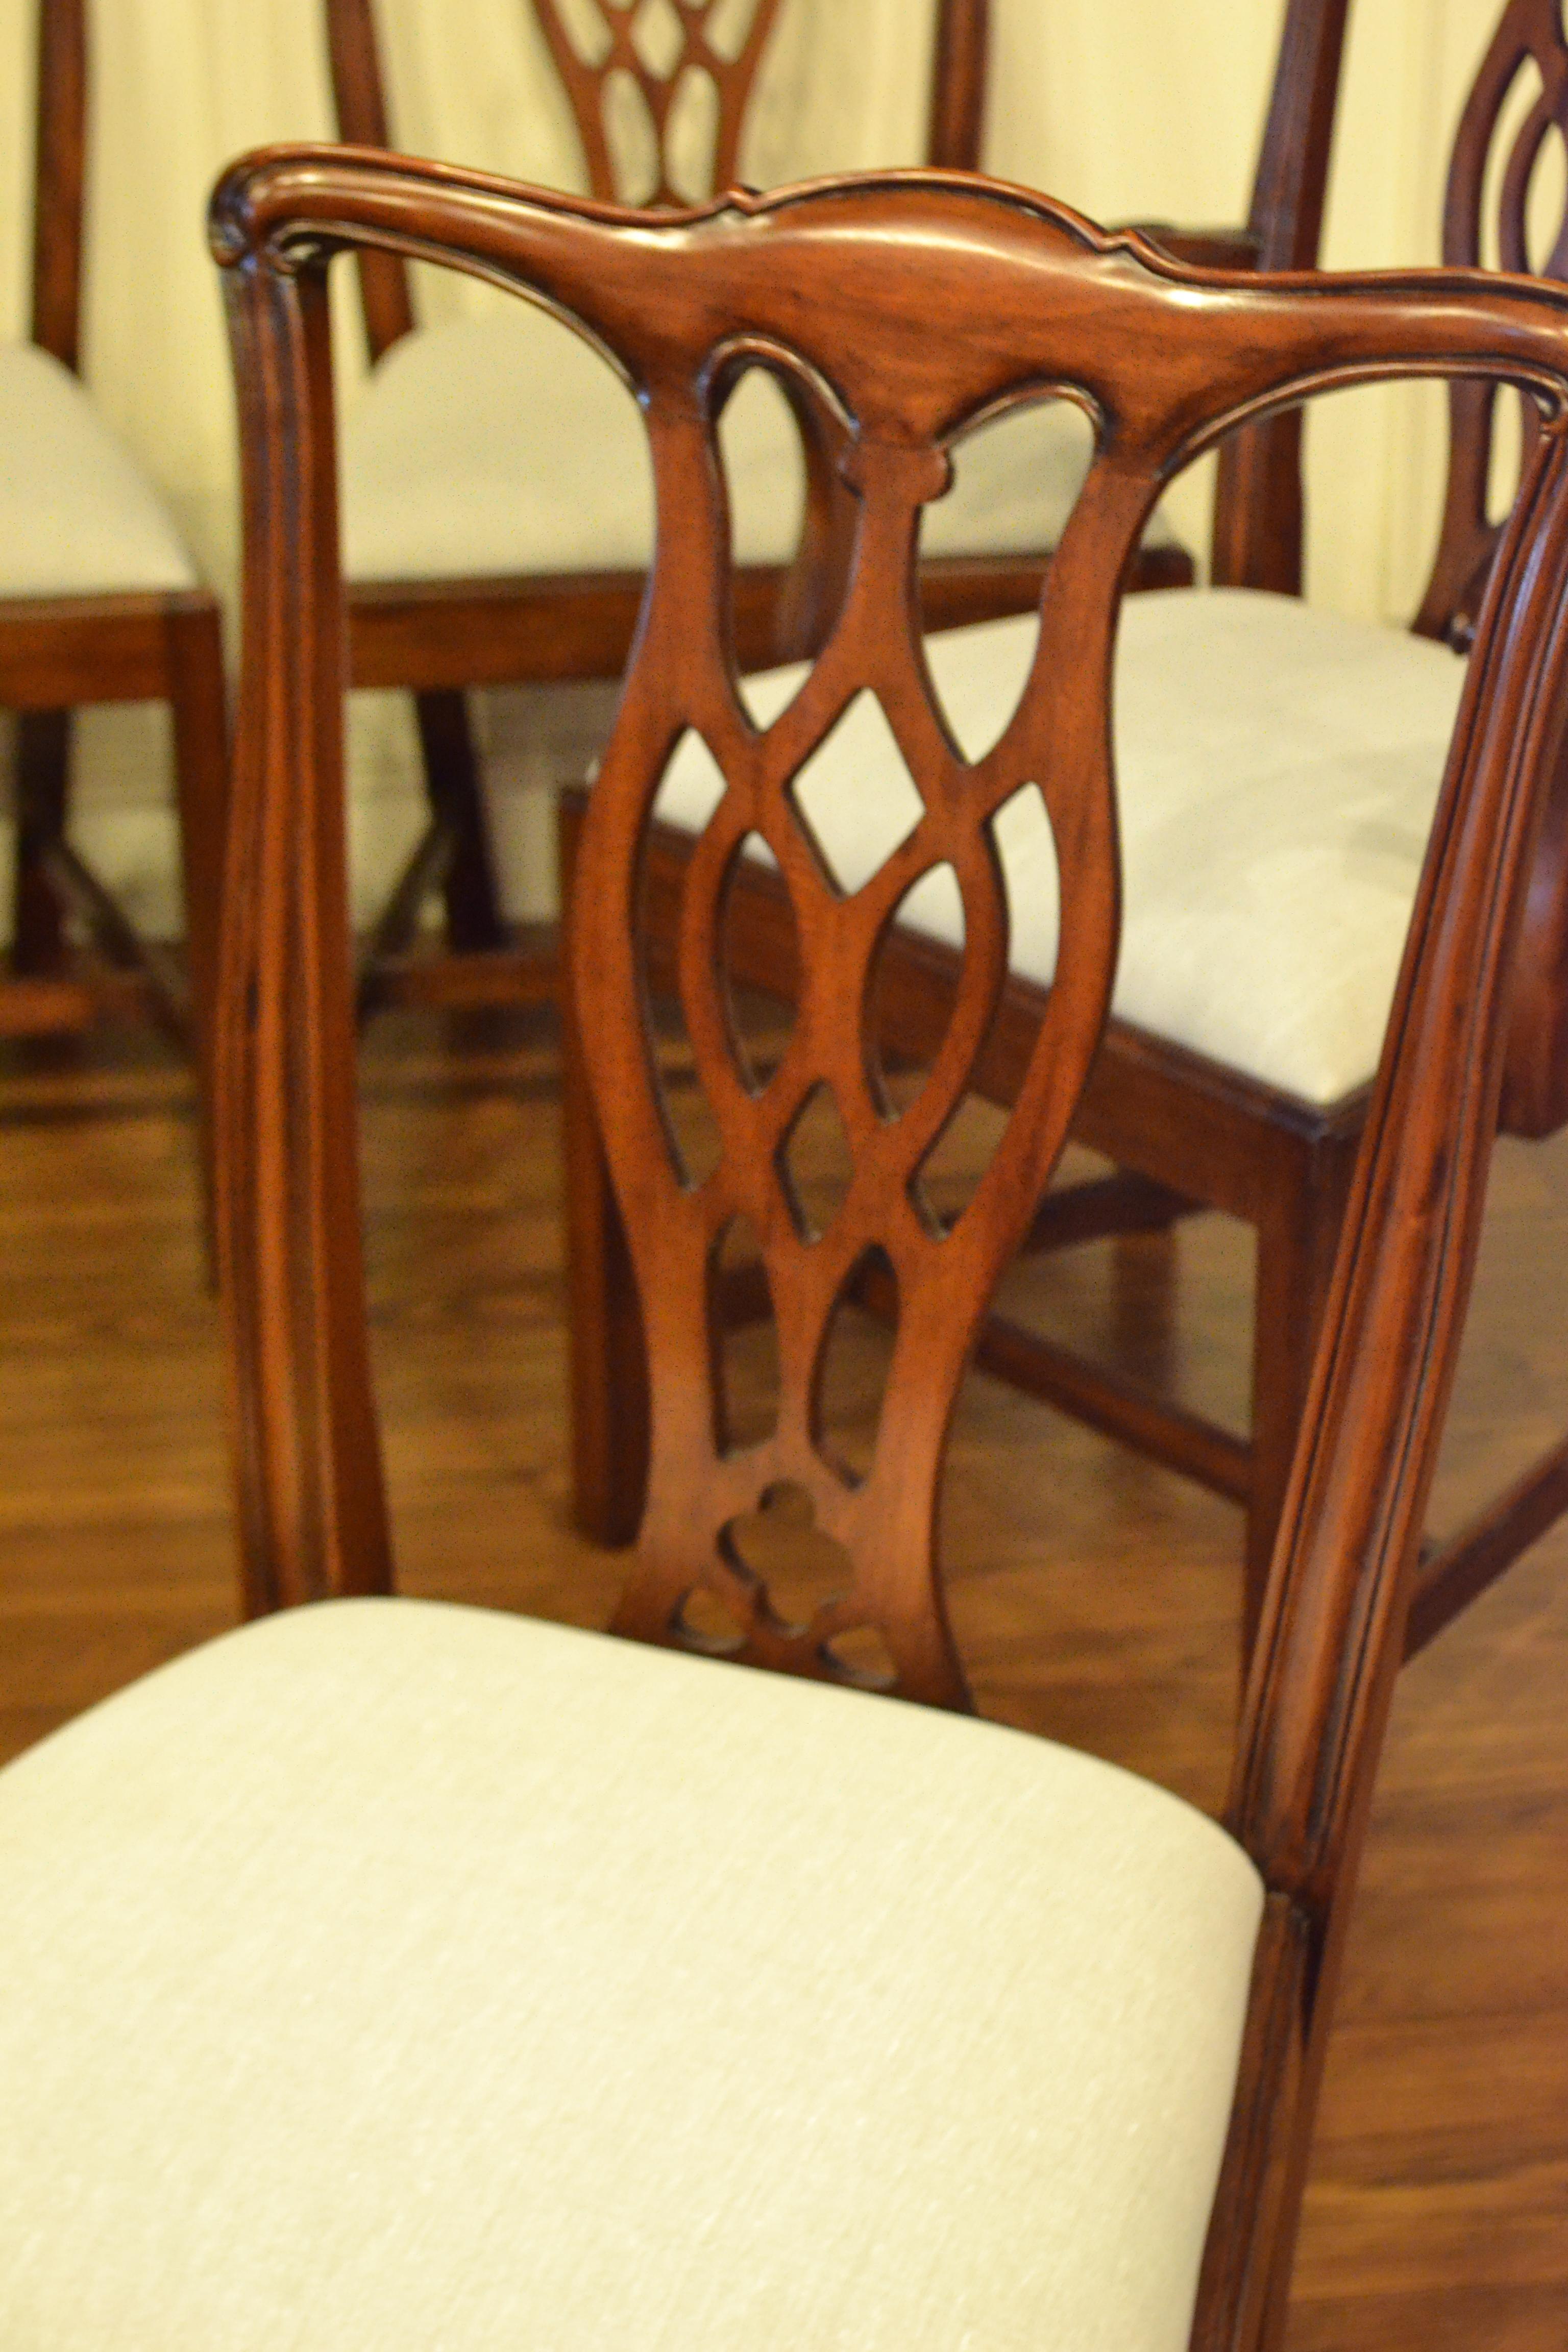 These are a set of four new traditional mahogany dining chairs. Their design was inspired by the early English Chippendale style straight leg dining chairs from the Georgian period. They feature classic early Chippendale styling with less carvings